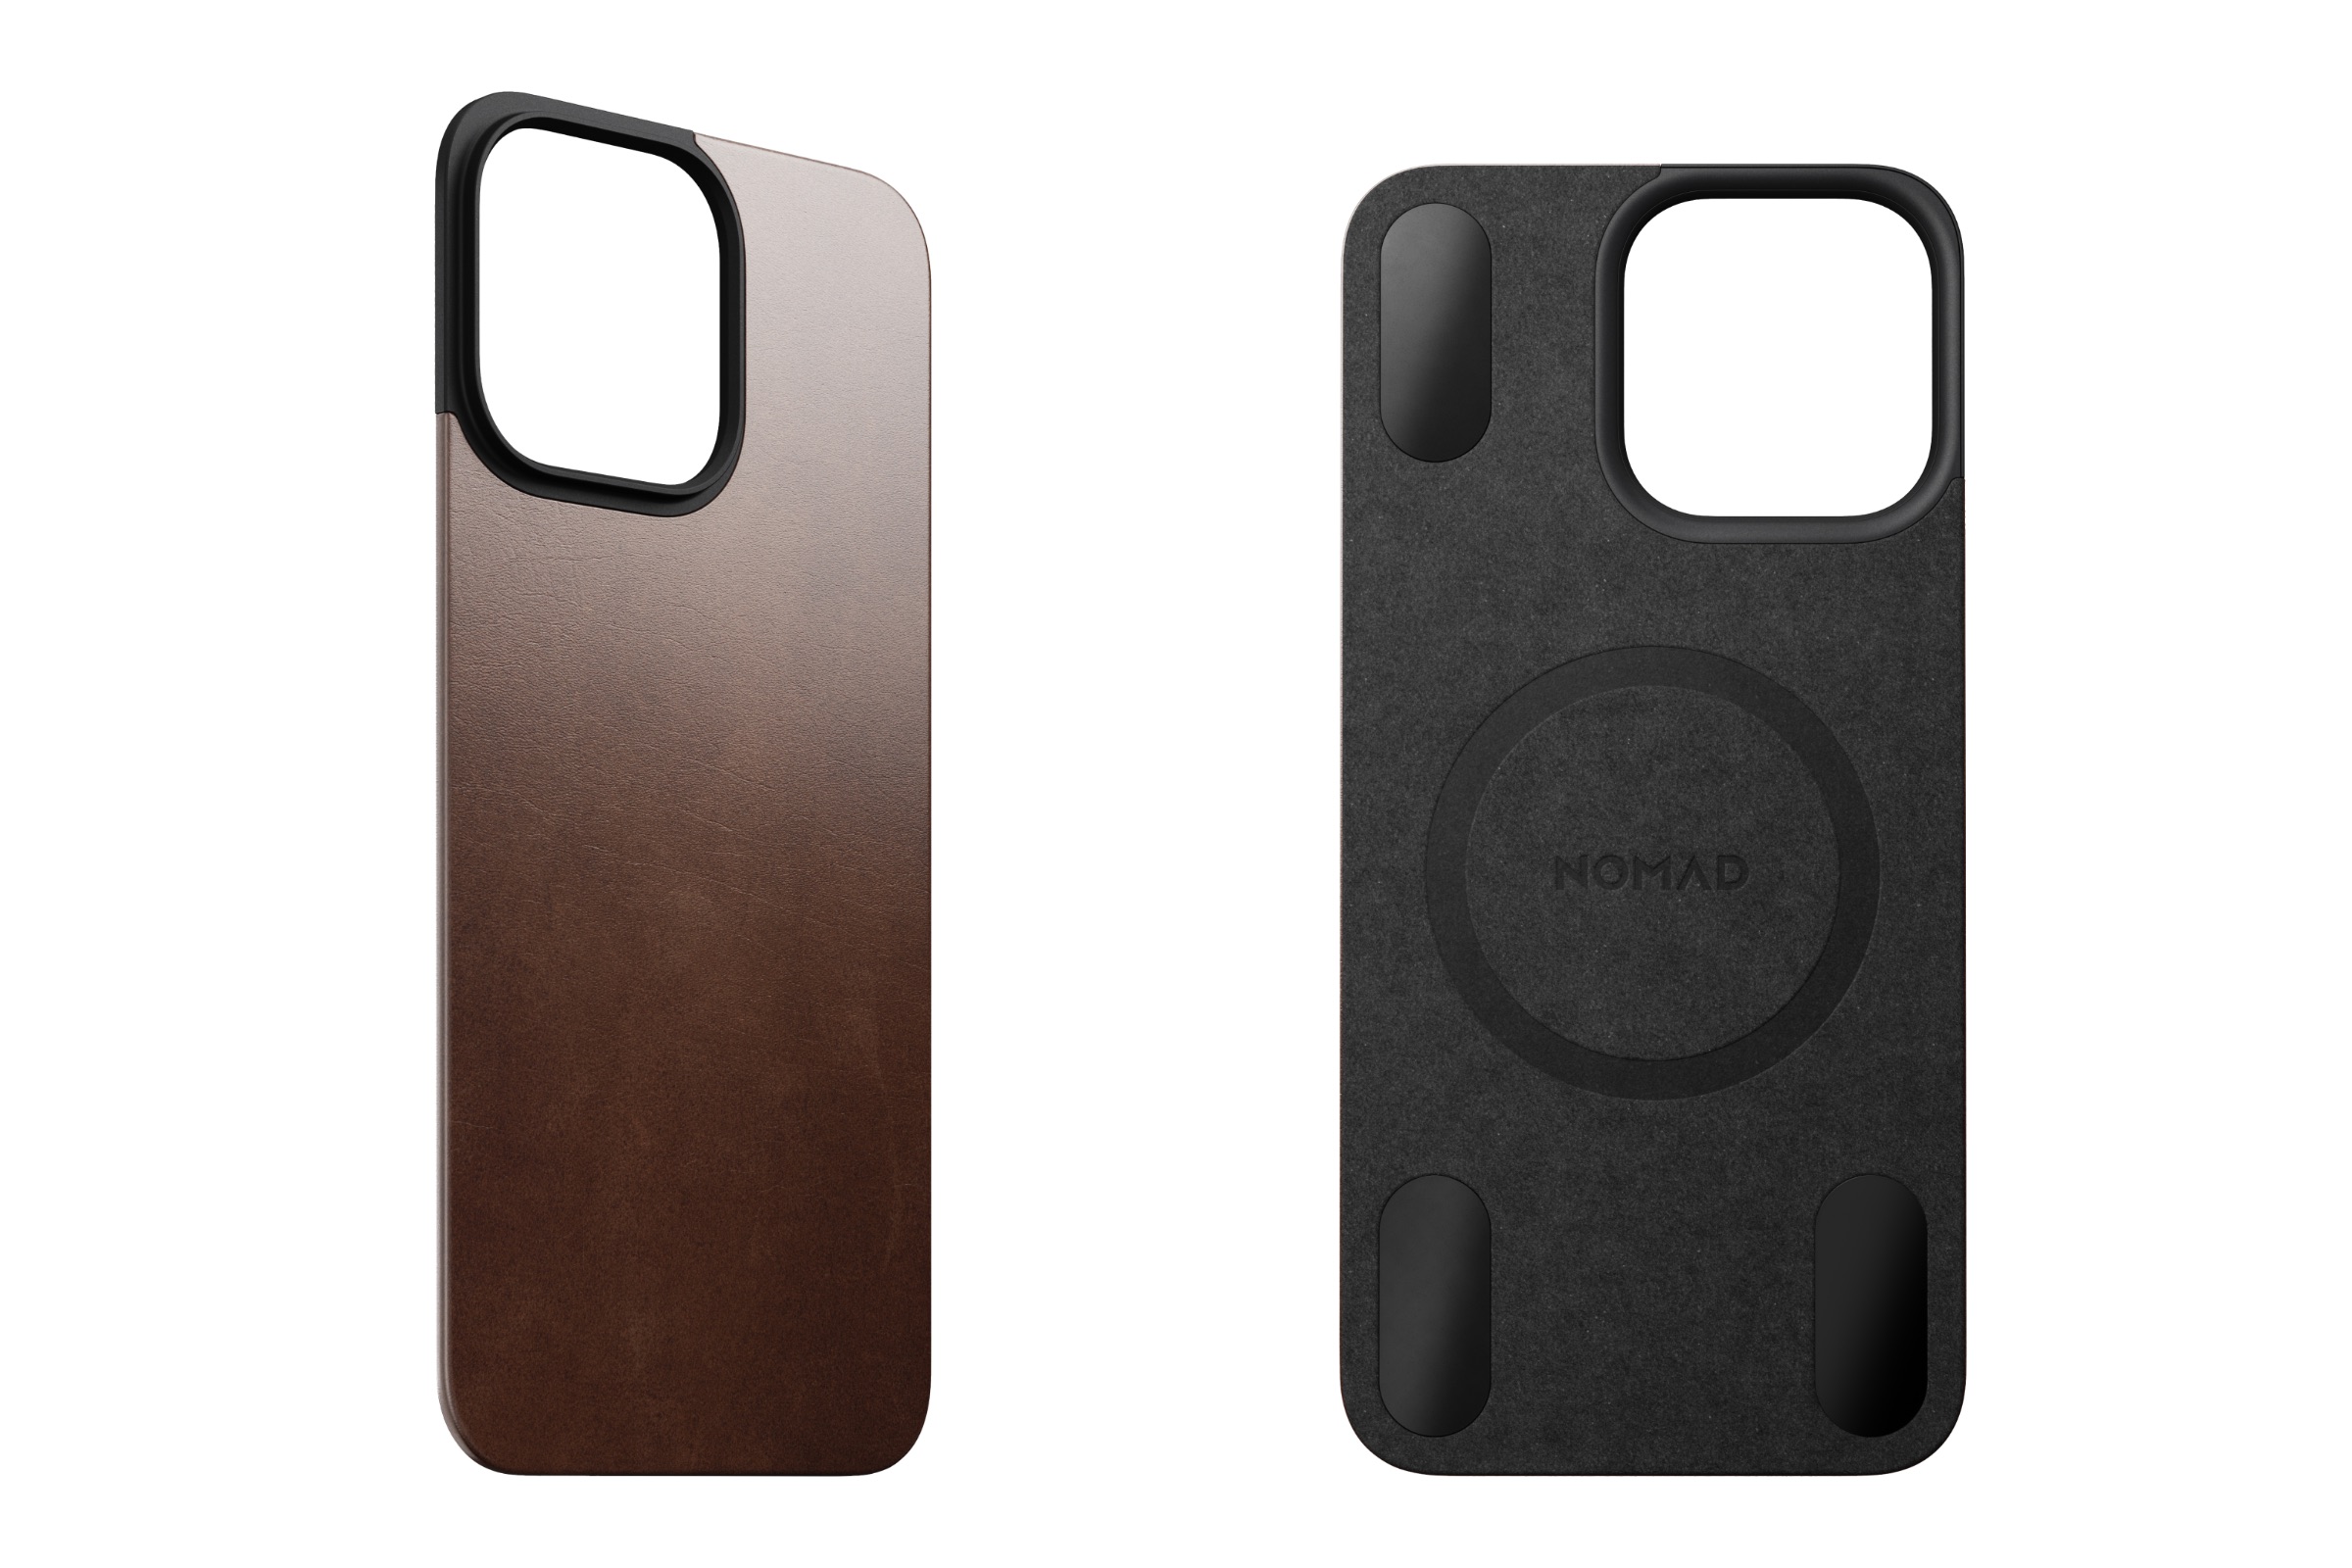 Nomad's new iPhone accessory is unlike anything you've seen before 